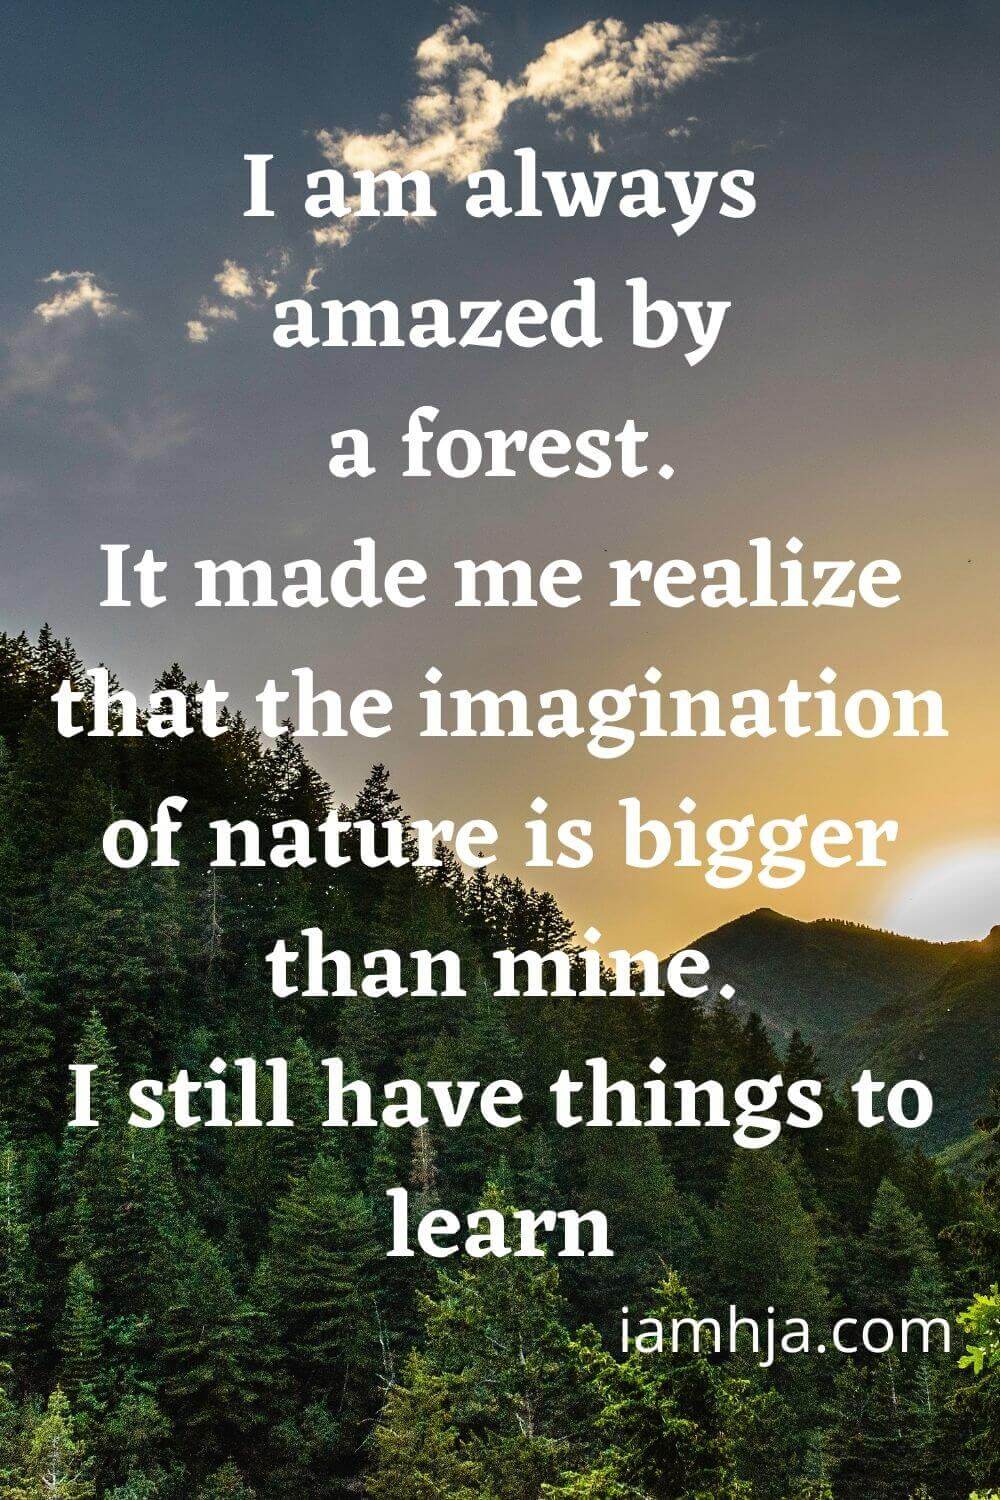 I am always amazed by a forest. It made me realize that the imagination of nature is bigger than mine. I still have things to learn